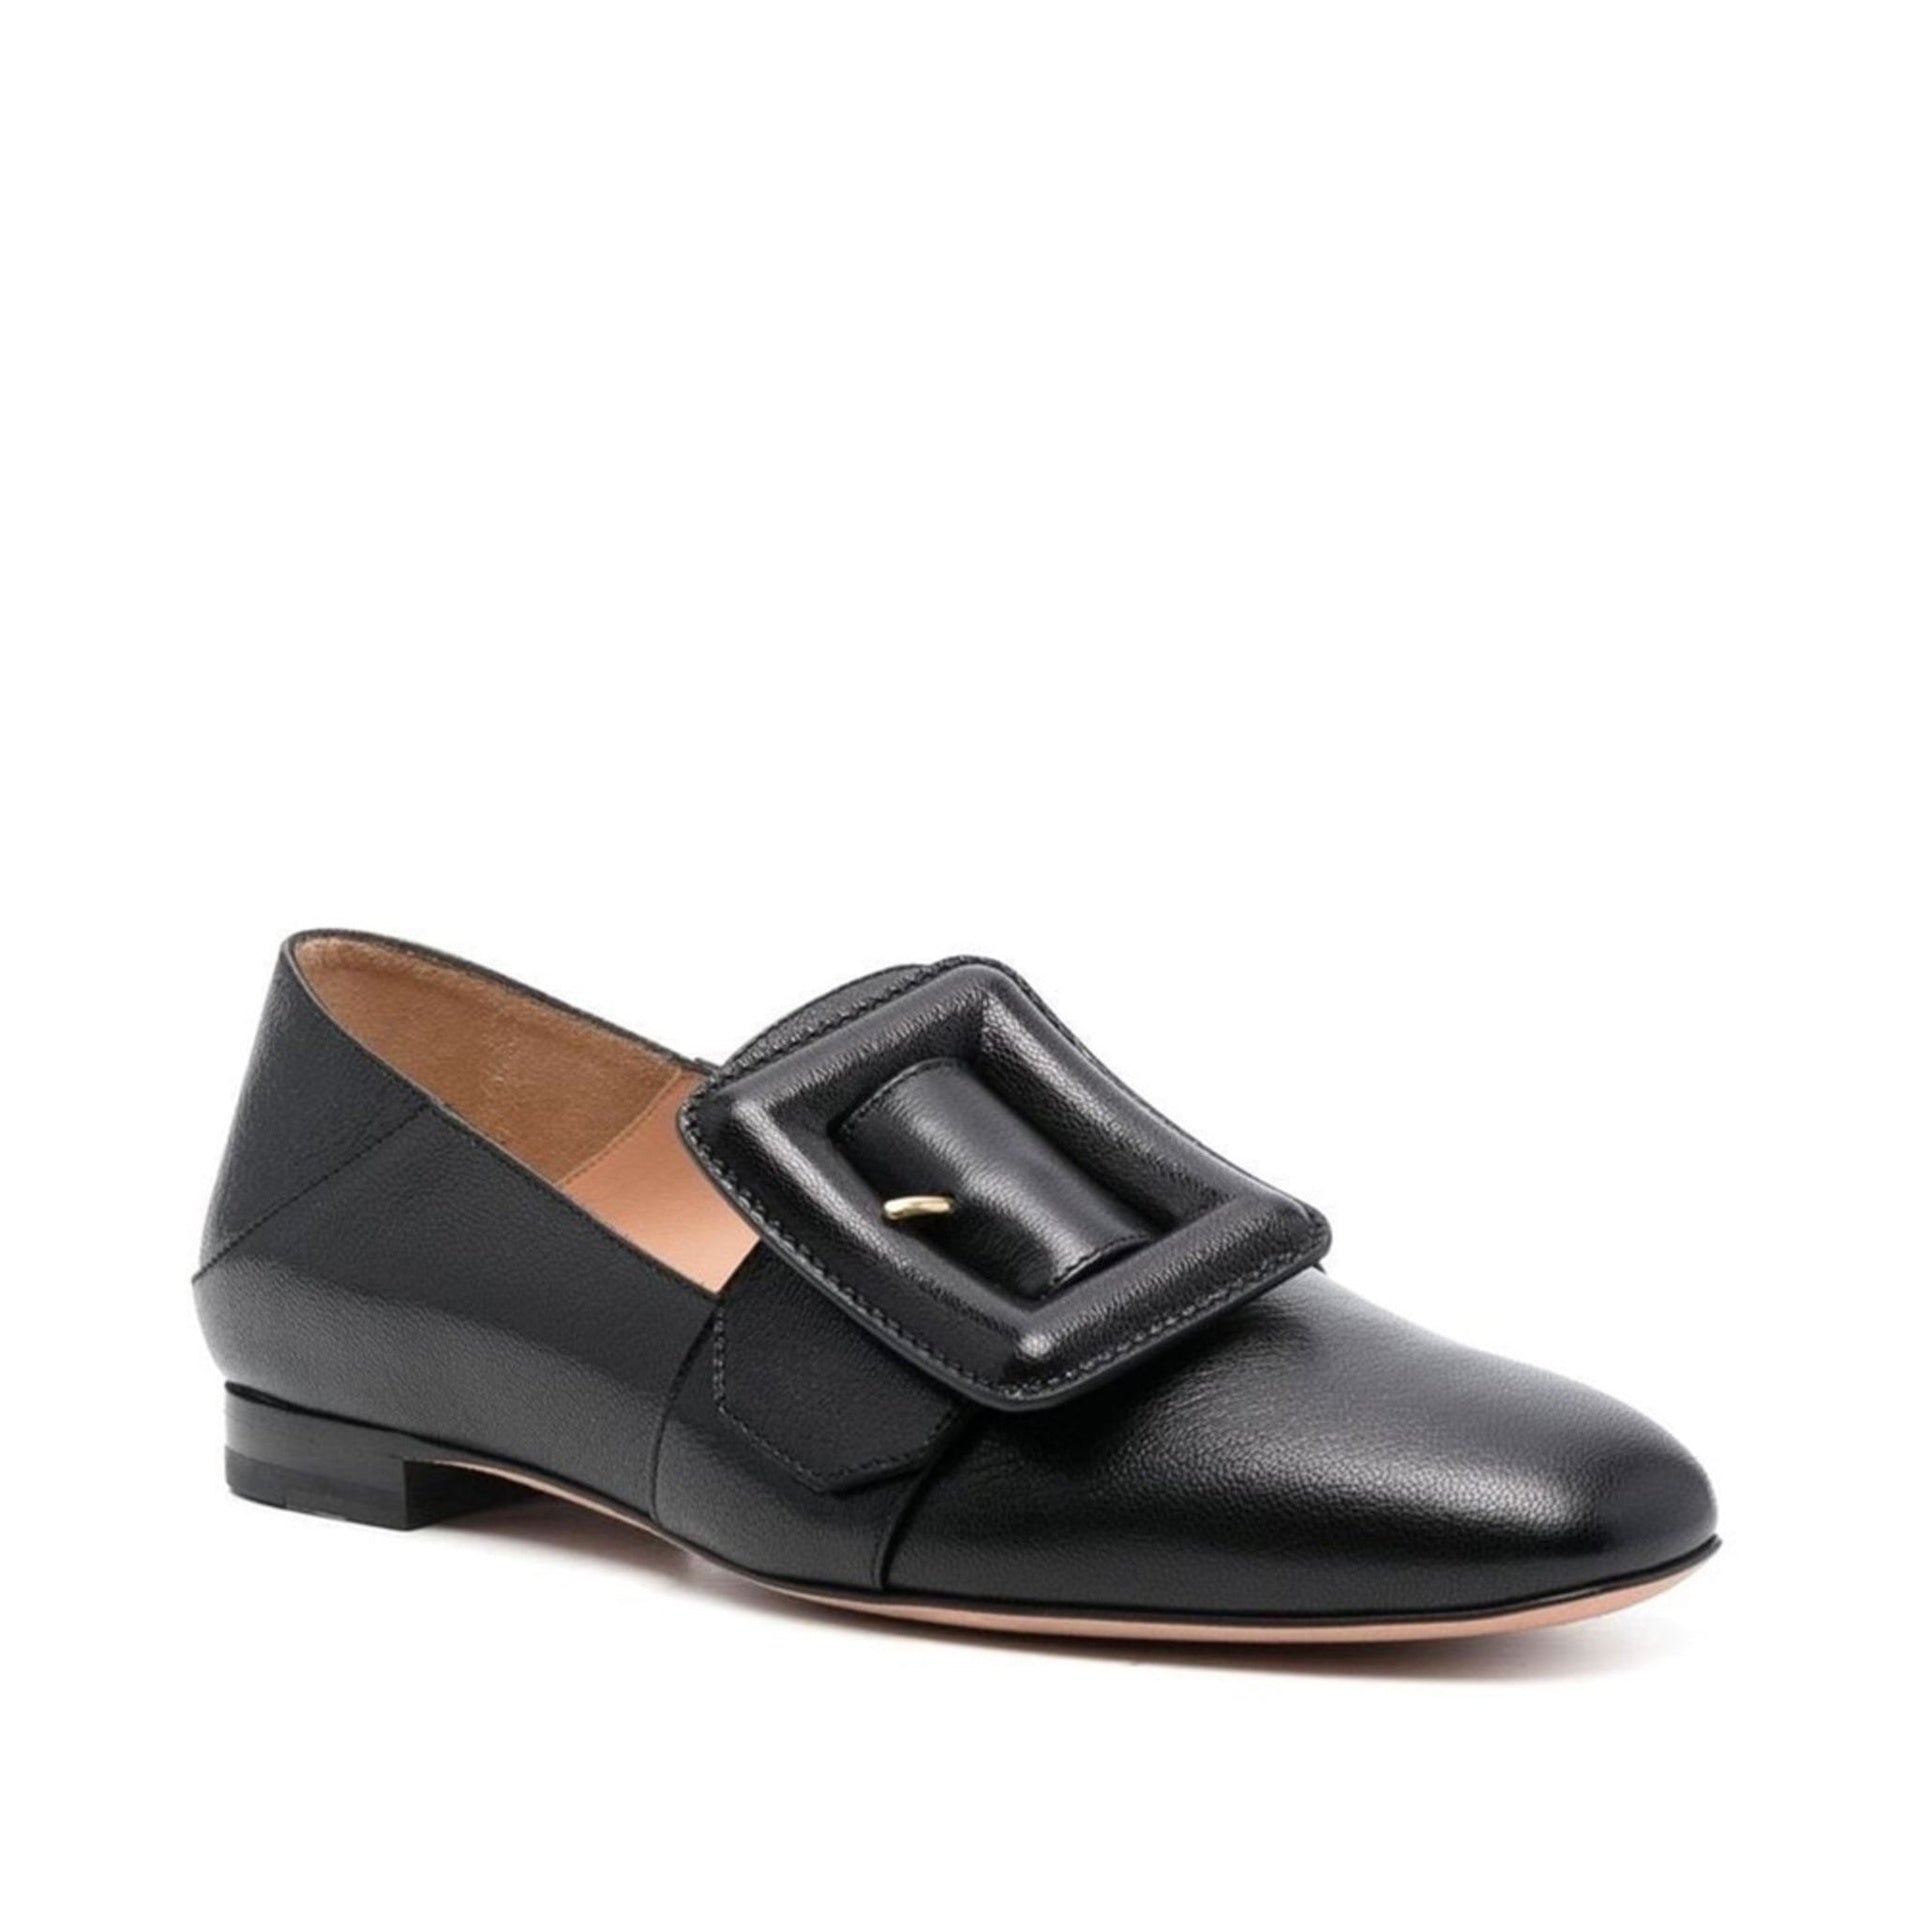 BALLY-OUTLET-SALE-Bally-Janelle-Loafers-Flache-Schuhe-ARCHIVE-COLLECTION-2.jpg